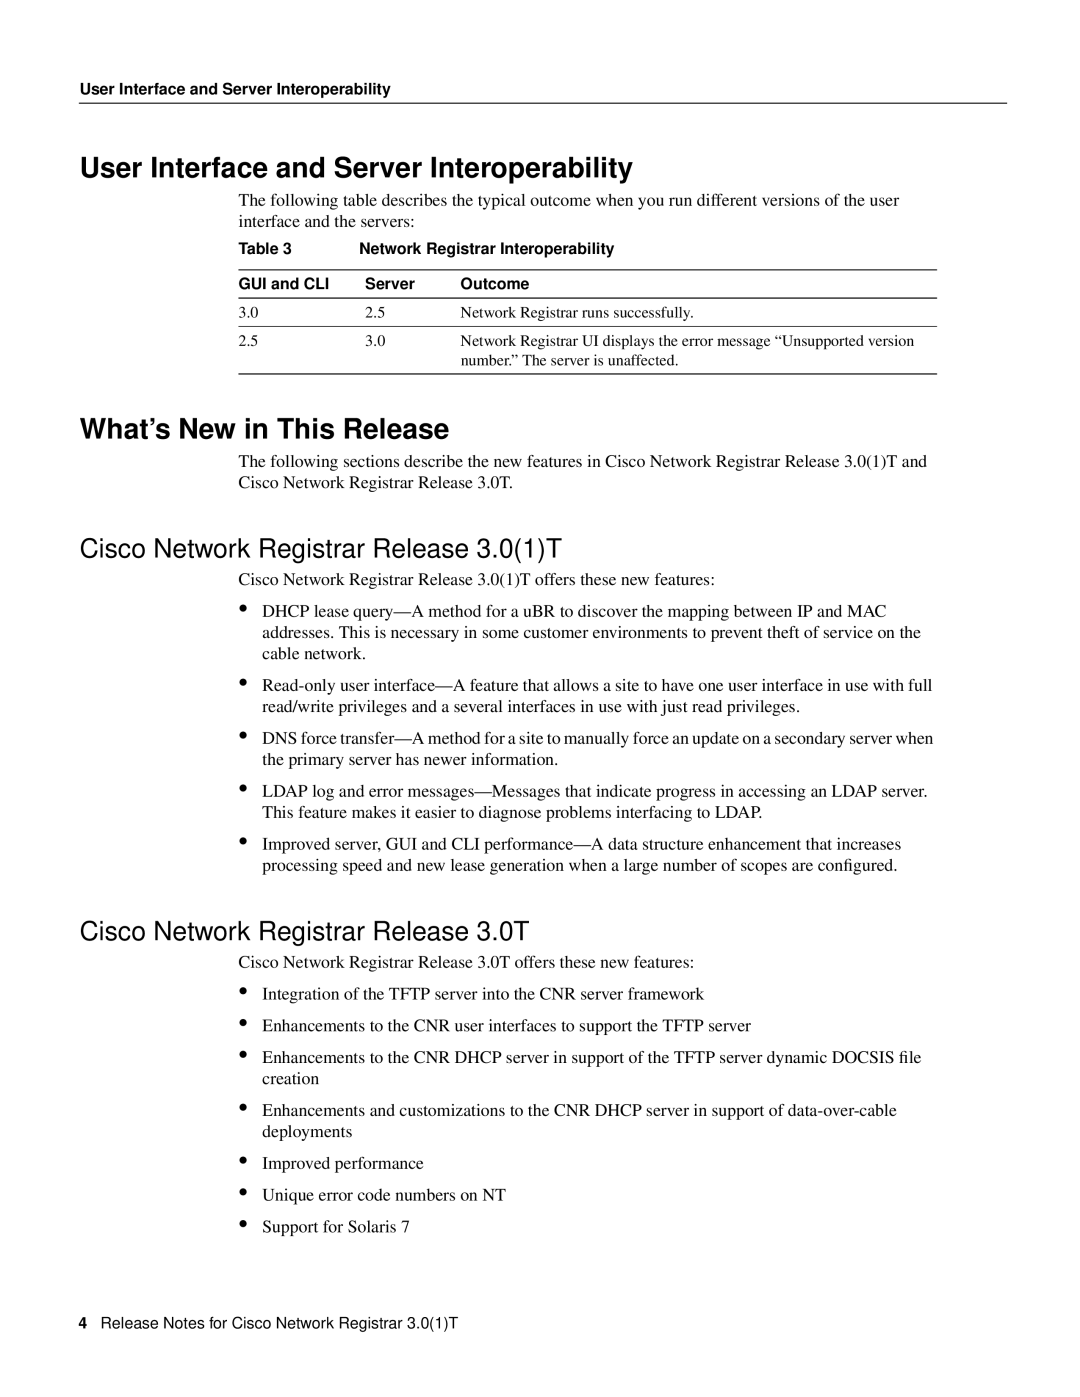 Cisco Systems 3.0(1) manual User Interface and Server Interoperability, What’s New in This Release 